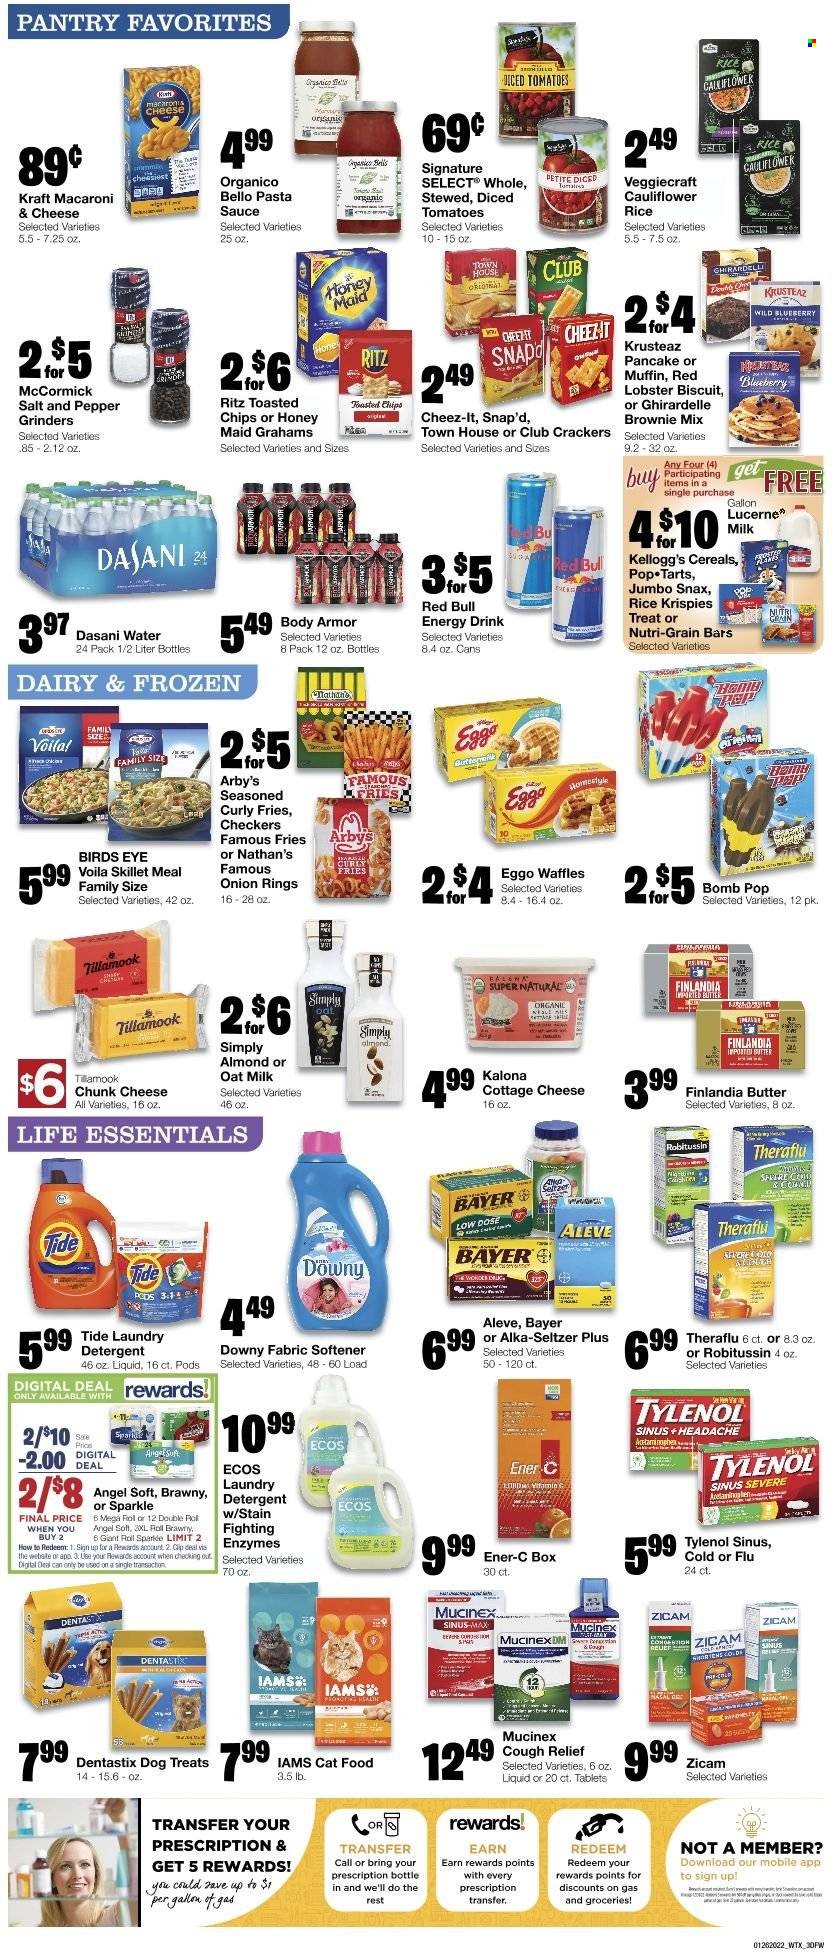 thumbnail - Market Street Flyer - 01/26/2022 - 02/01/2022 - Sales products - muffin, waffles, brownie mix, tomatoes, lobster, macaroni & cheese, onion rings, pasta, sauce, pancakes, Bird's Eye, Kraft®, cottage cheese, chunk cheese, milk, oat milk, eggs, butter, curly potato fries, potato fries, crackers, Kellogg's, biscuit, Pop-Tarts, Nutri-Grain bars, RITZ, Cheez-It, cereals, Rice Krispies, Honey Maid, Nutri-Grain, Body Armor, energy drink, Red Bull, detergent, Tide, fabric softener, laundry detergent, Downy Laundry, animal food, cat food, Dentastix, Iams, Aleve, Mucinex, Robitussin, Theraflu, Tylenol, Alka-seltzer, Bayer. Page 3.